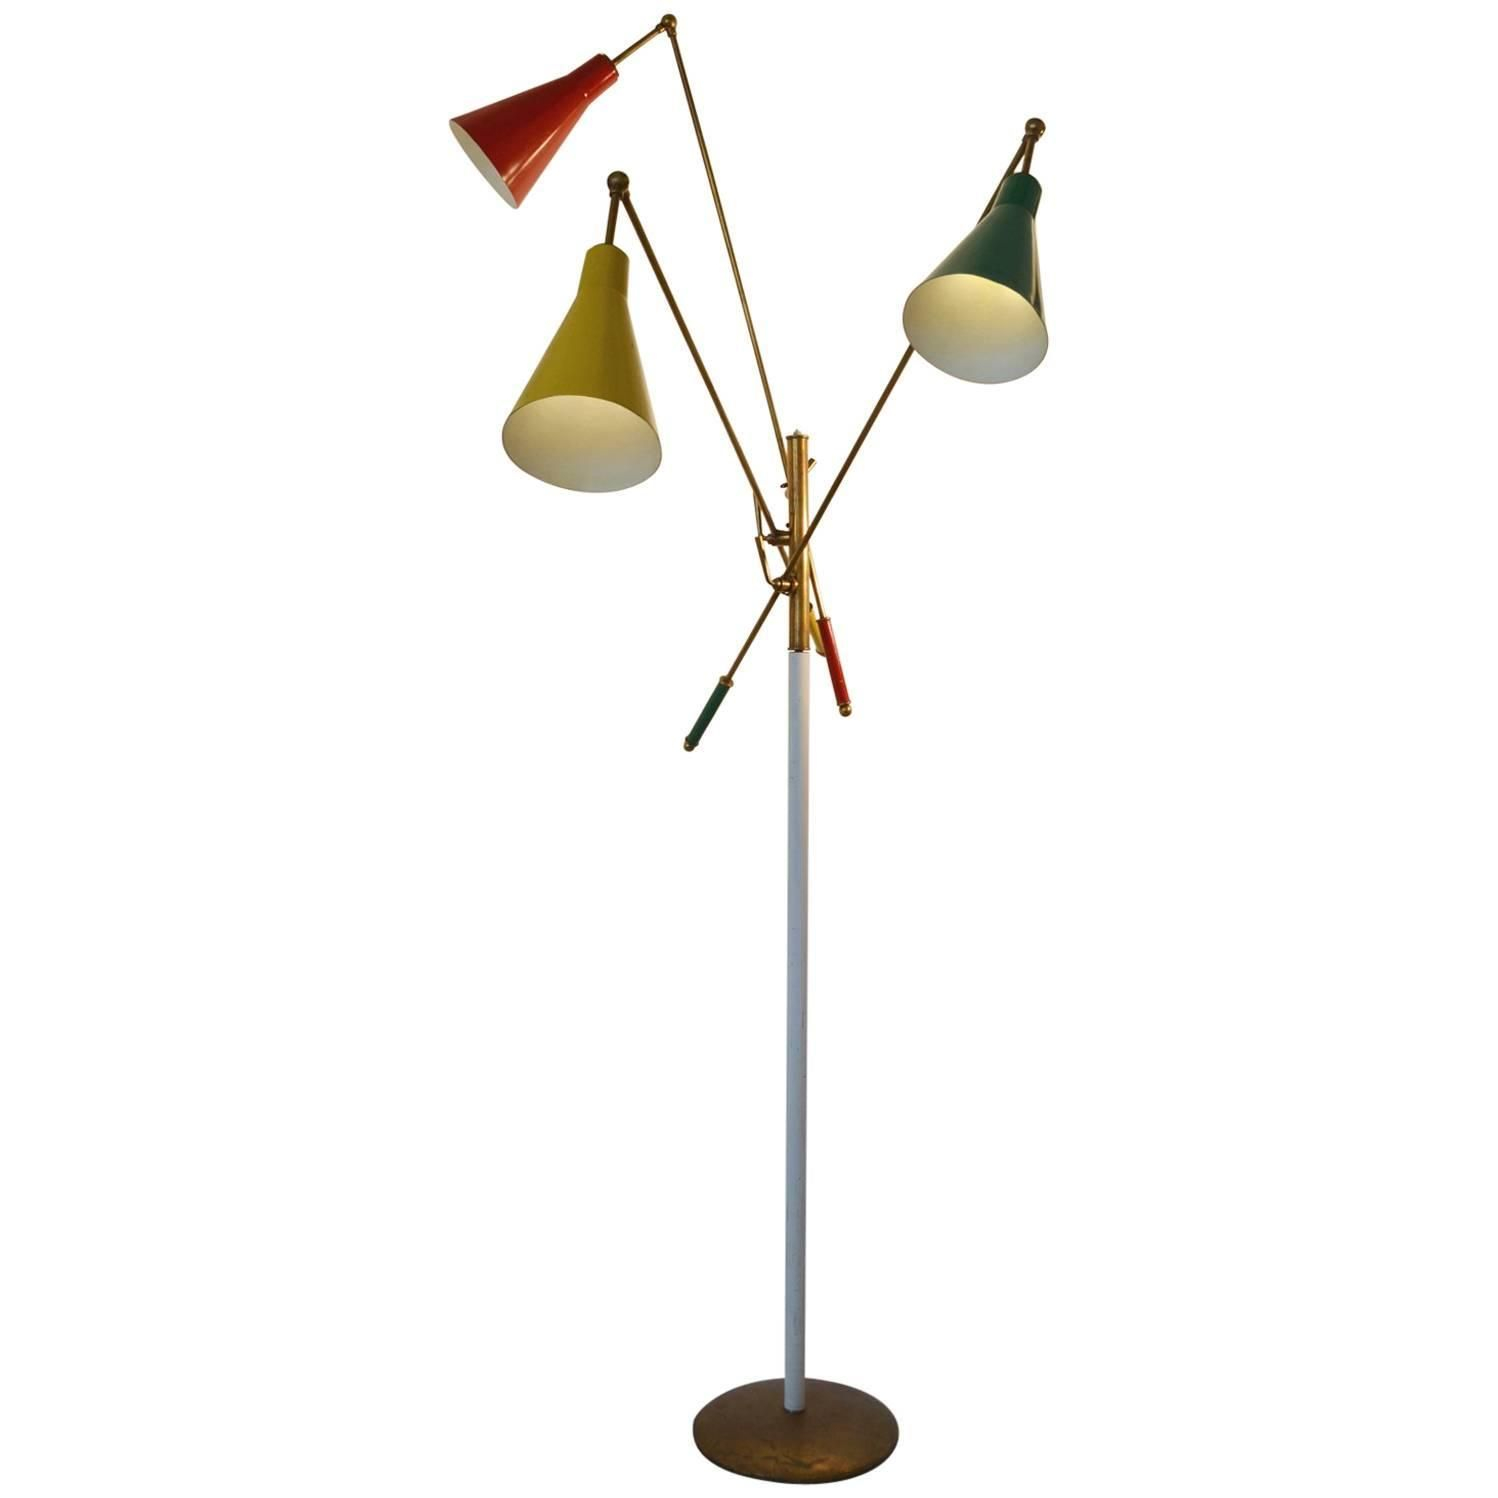 1950s Italian Multicolored Modernist Floor Lamp In The Style within dimensions 1498 X 1498